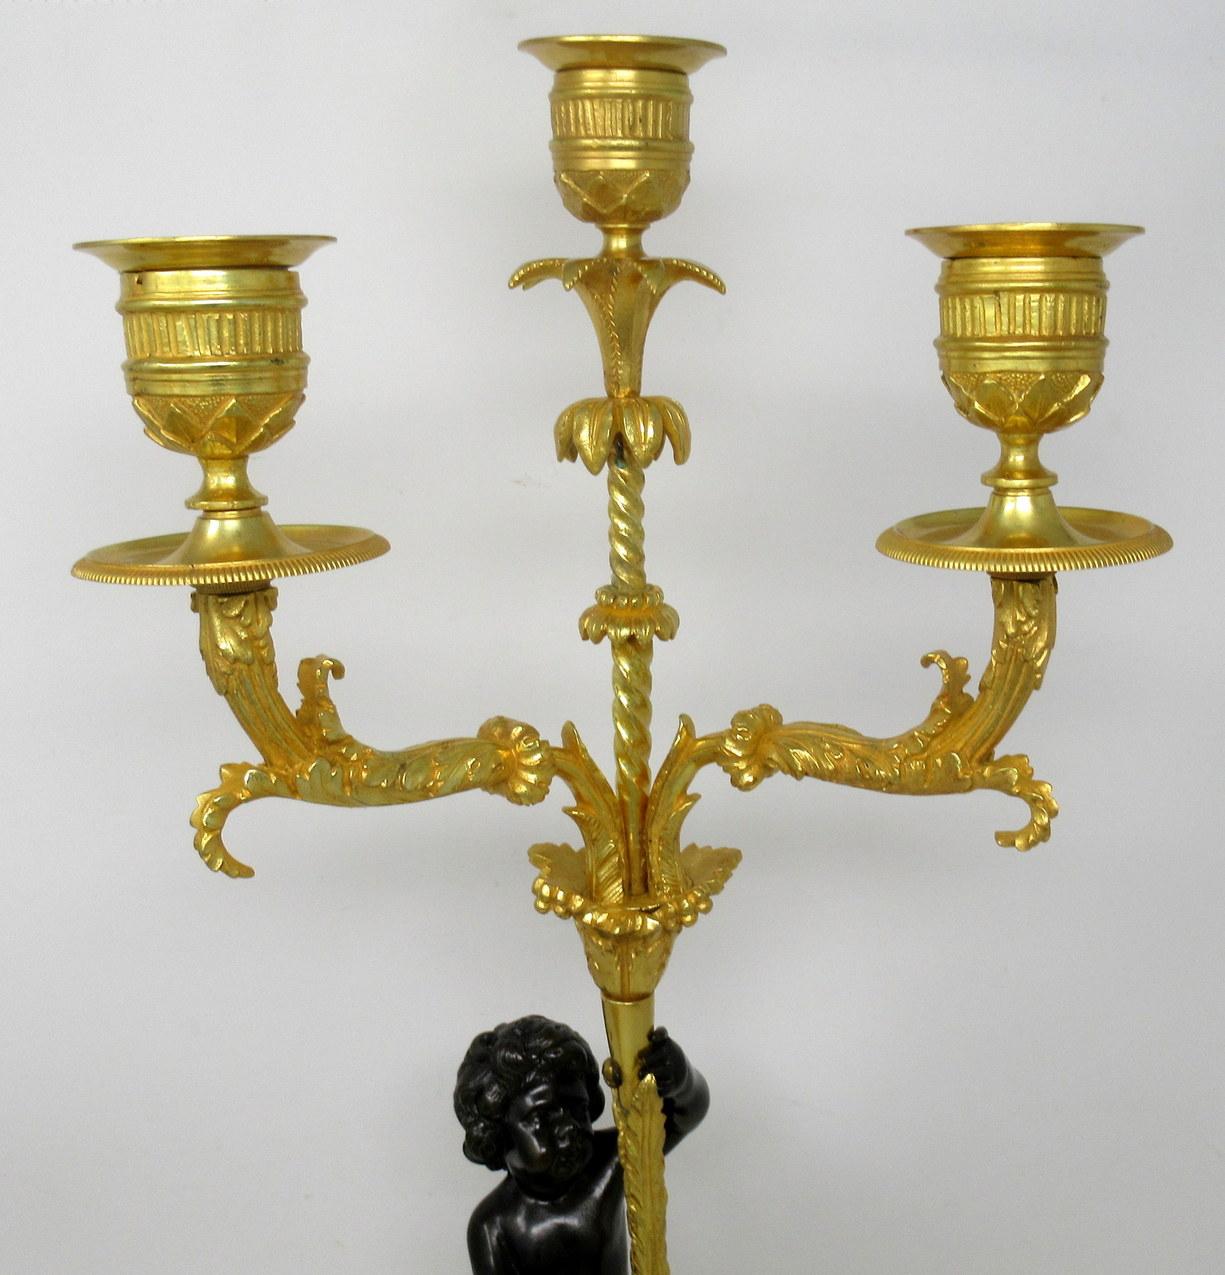 French Regency Empire Ormolu Bronze Candelabra Pierre-Philippe Thomire, Pair For Sale 4